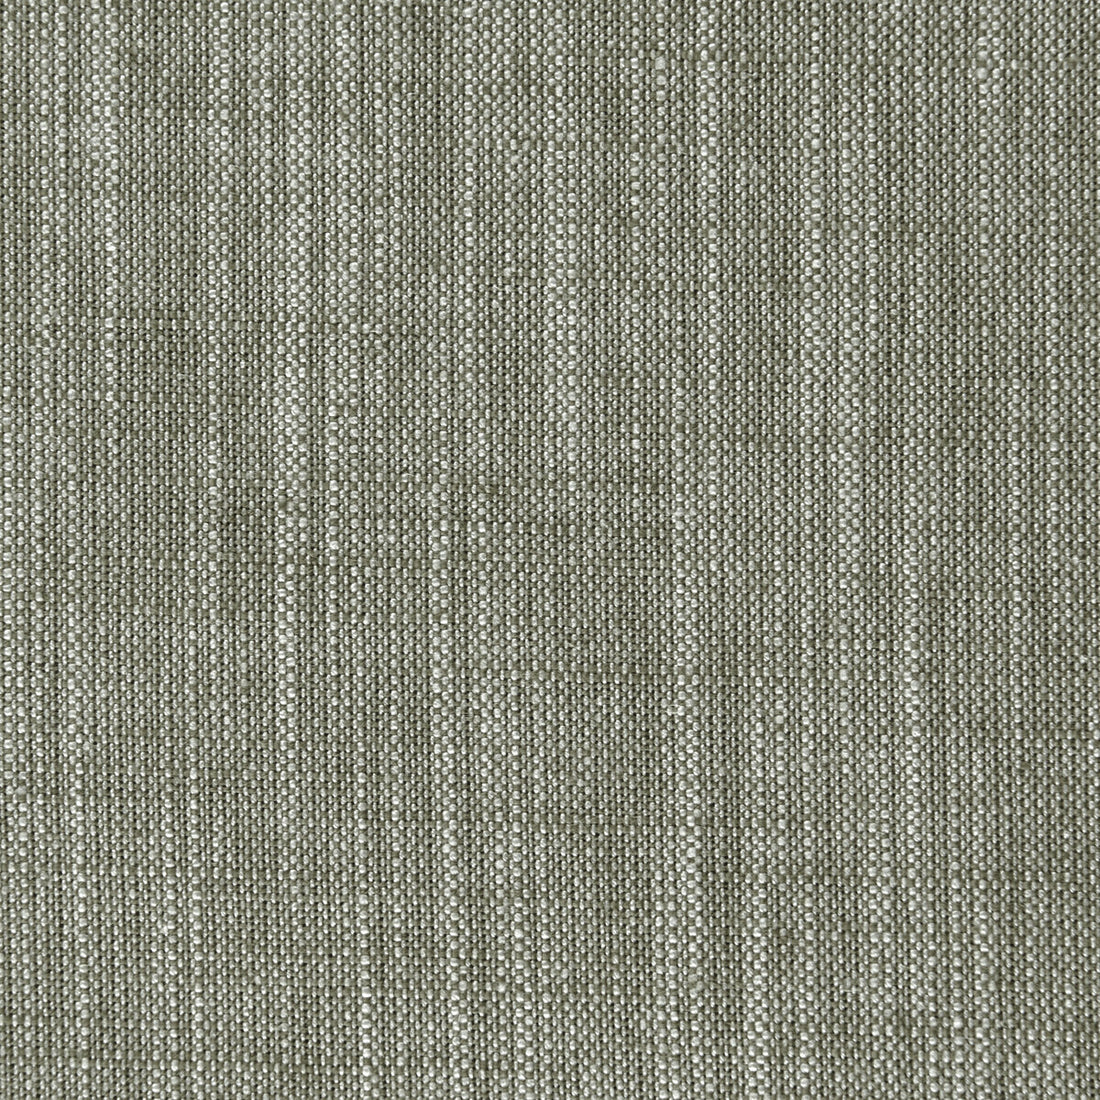 Biarritz fabric in khaki color - pattern F0965/25.CAC.0 - by Clarke And Clarke in the Clarke &amp; Clarke Biarritz collection